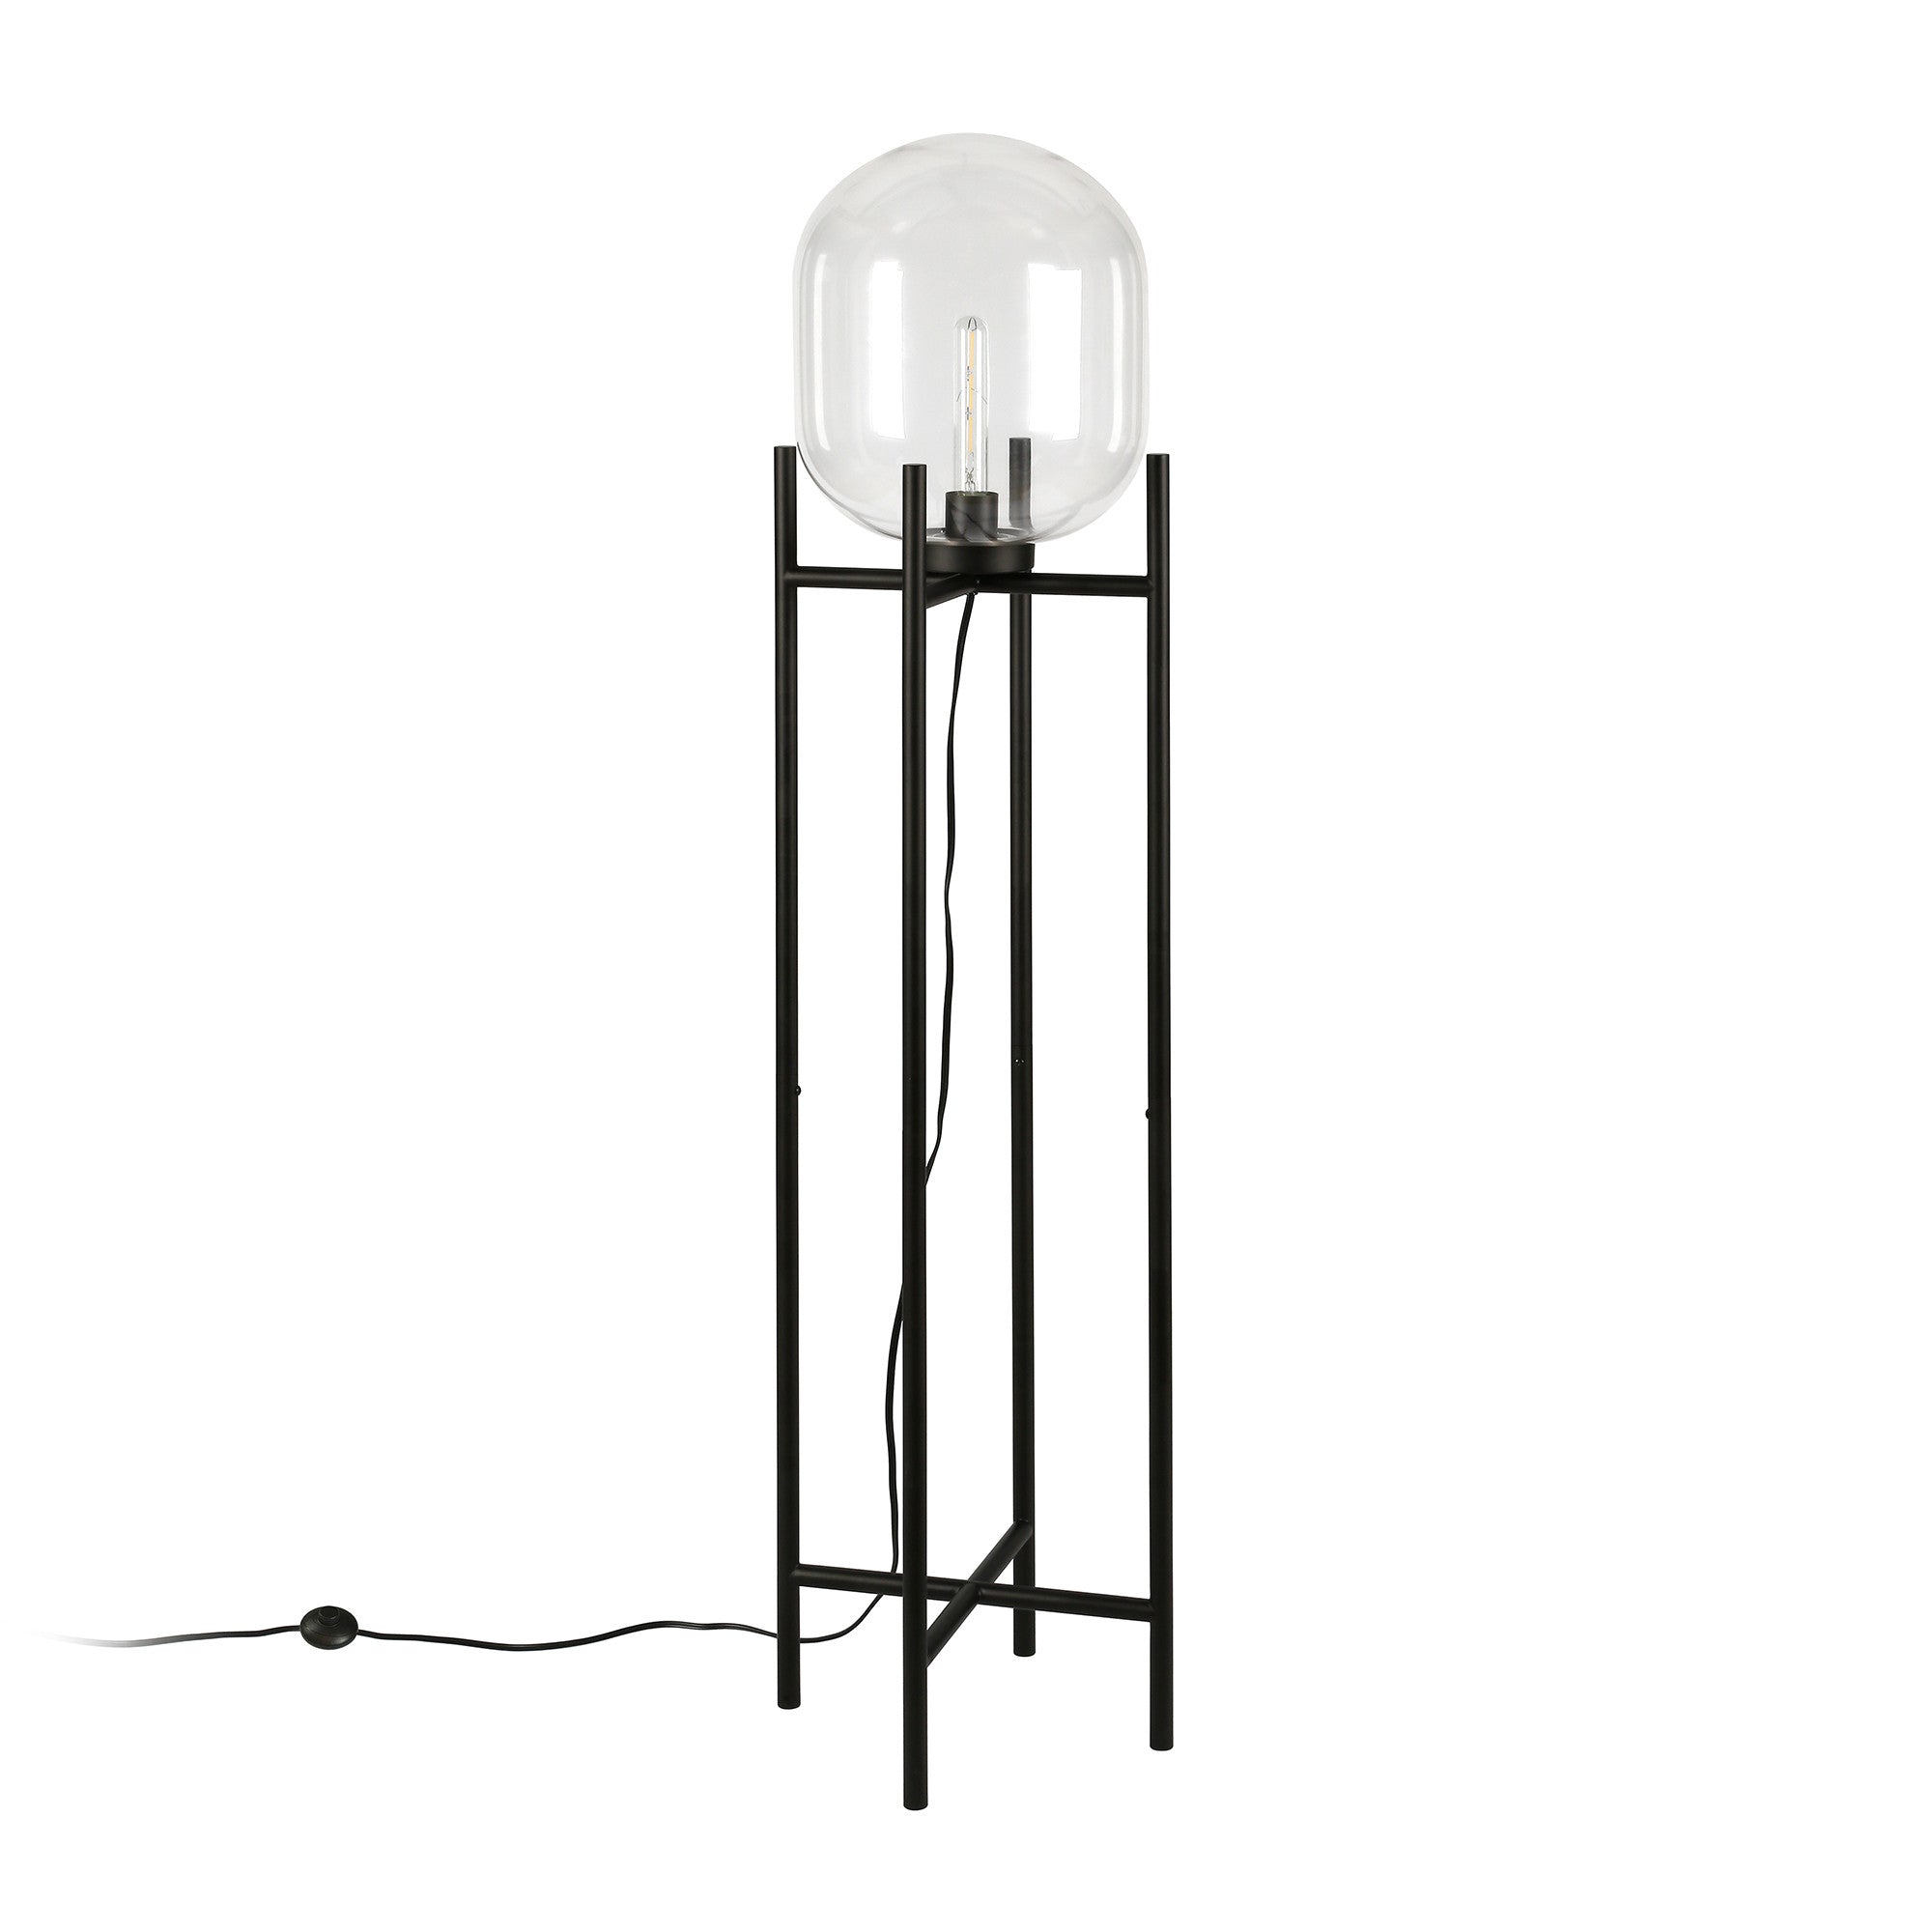 55" Black Novelty Floor Lamp With Clear Transparent Glass Globe Shade